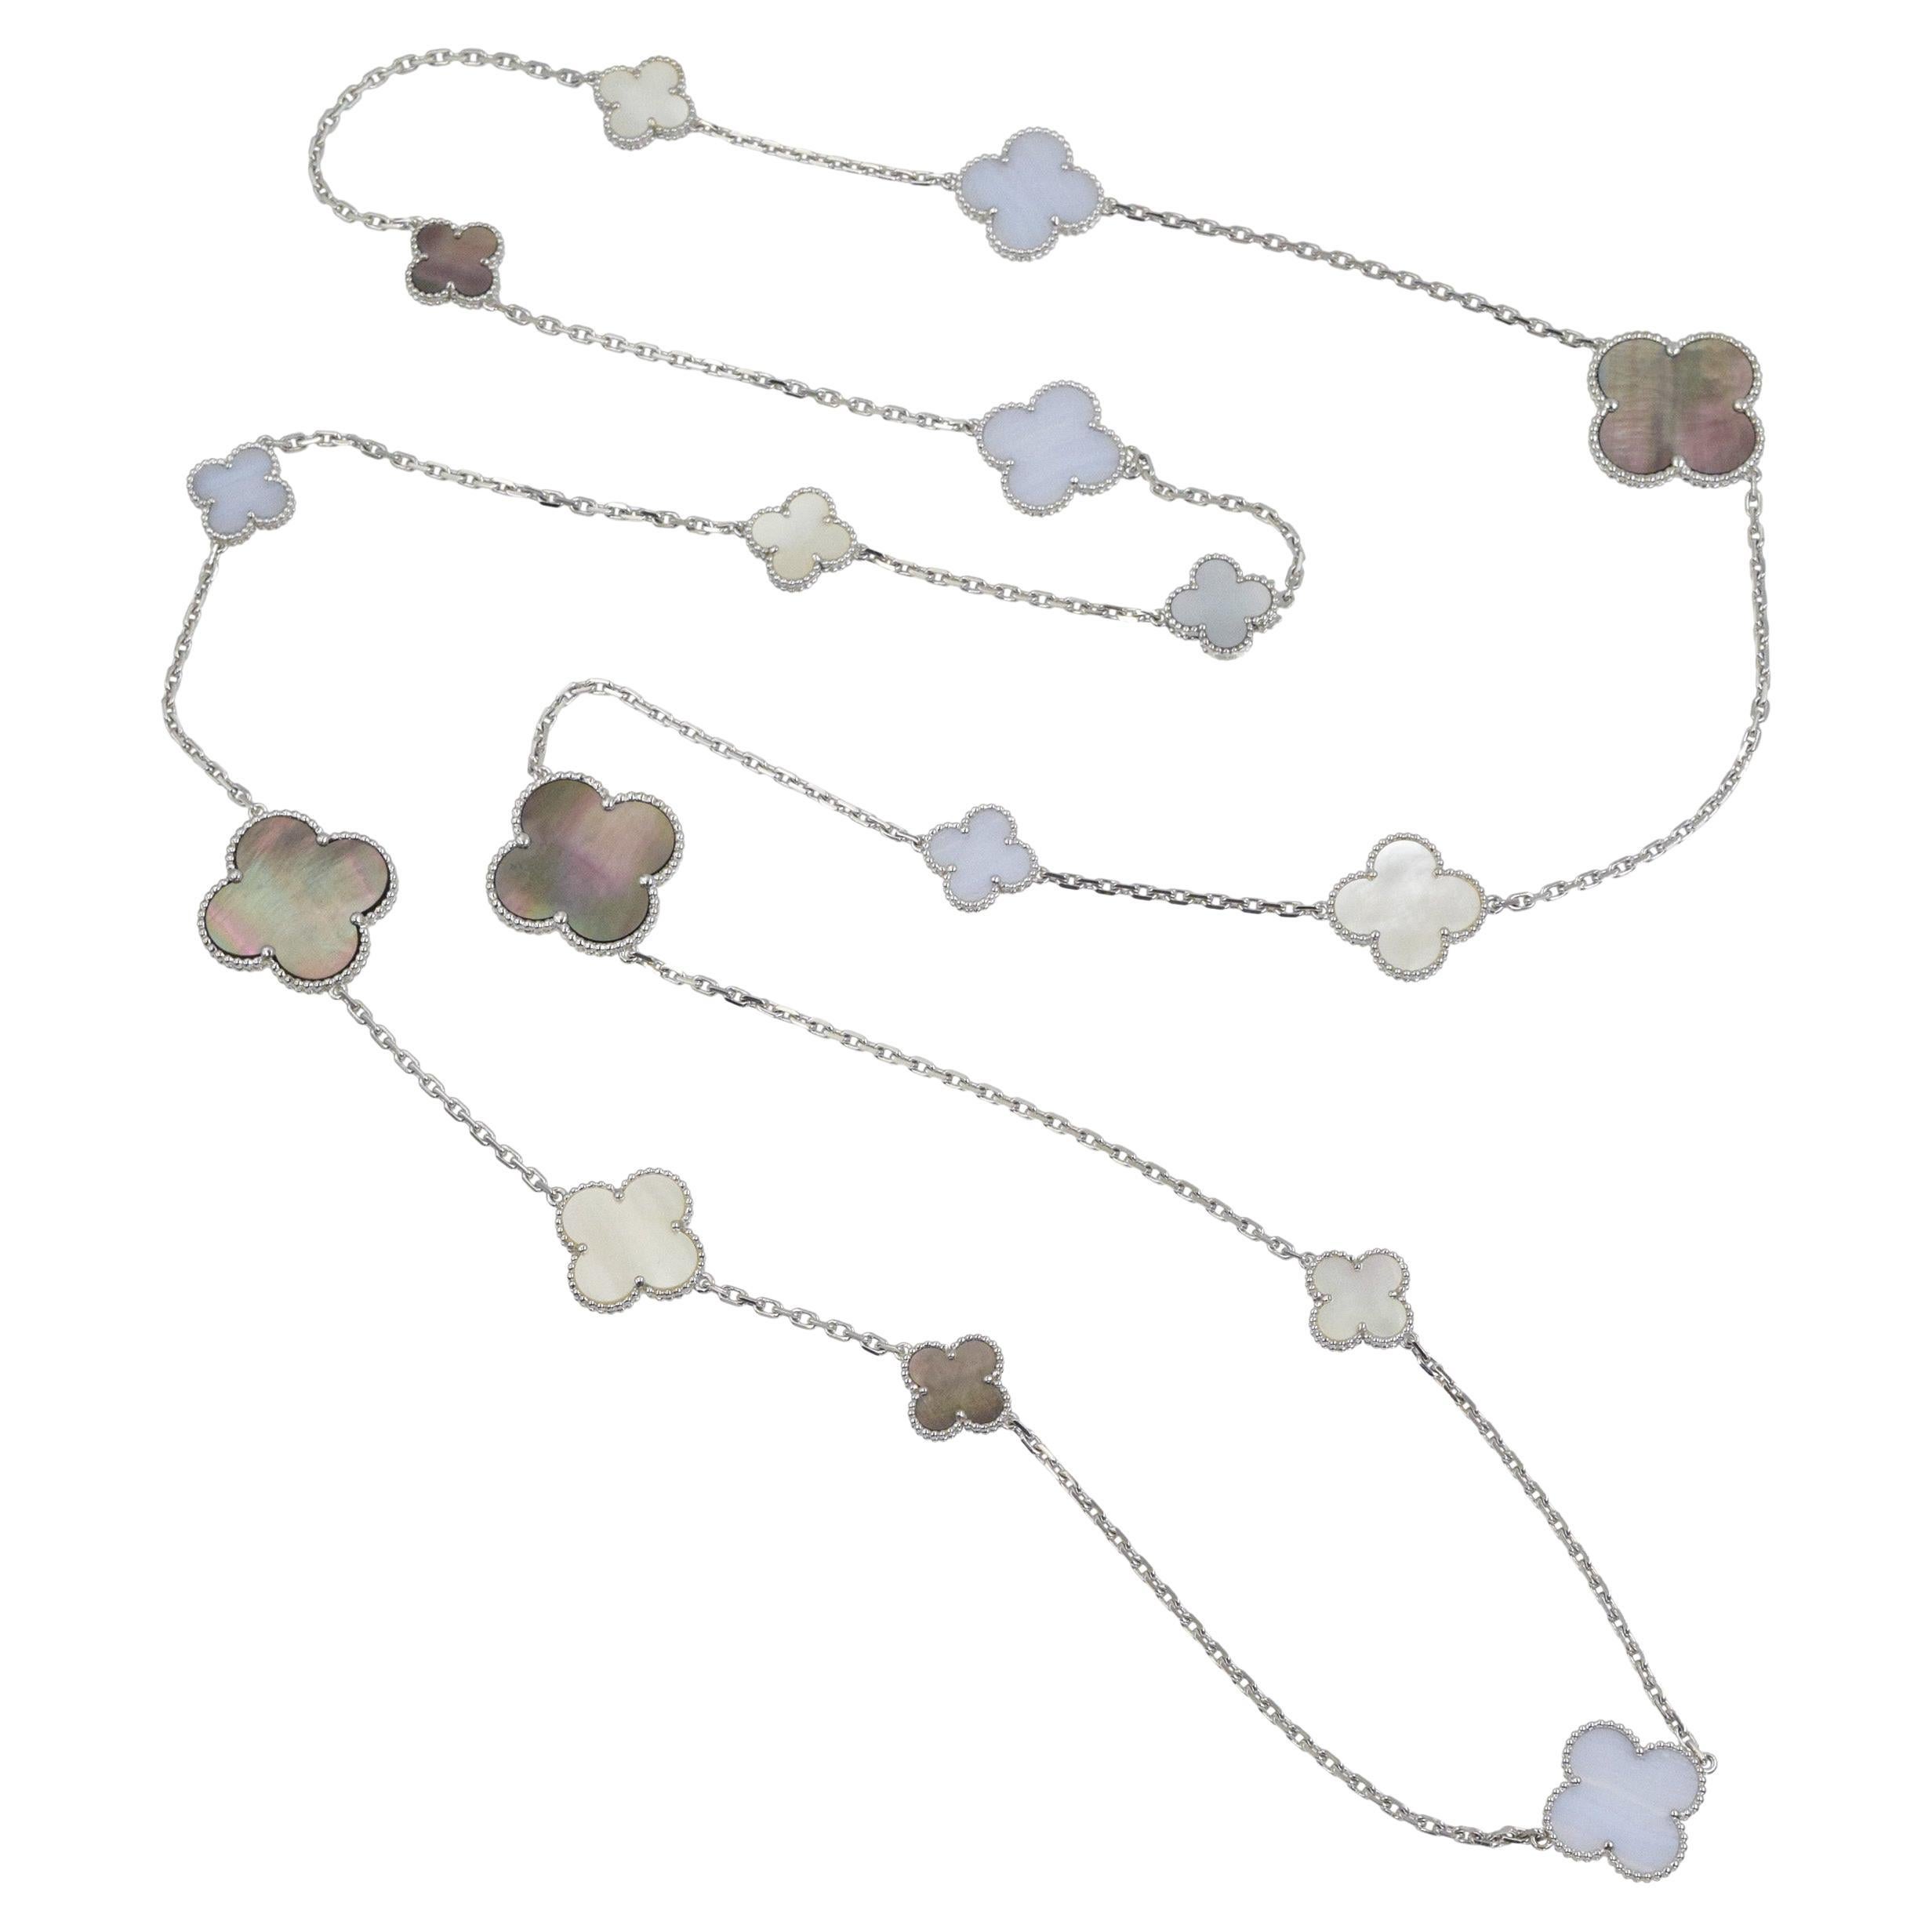  Van Cleef & Arpels "Magic " MOP and Chalcedony 16 motif Necklace For Sale